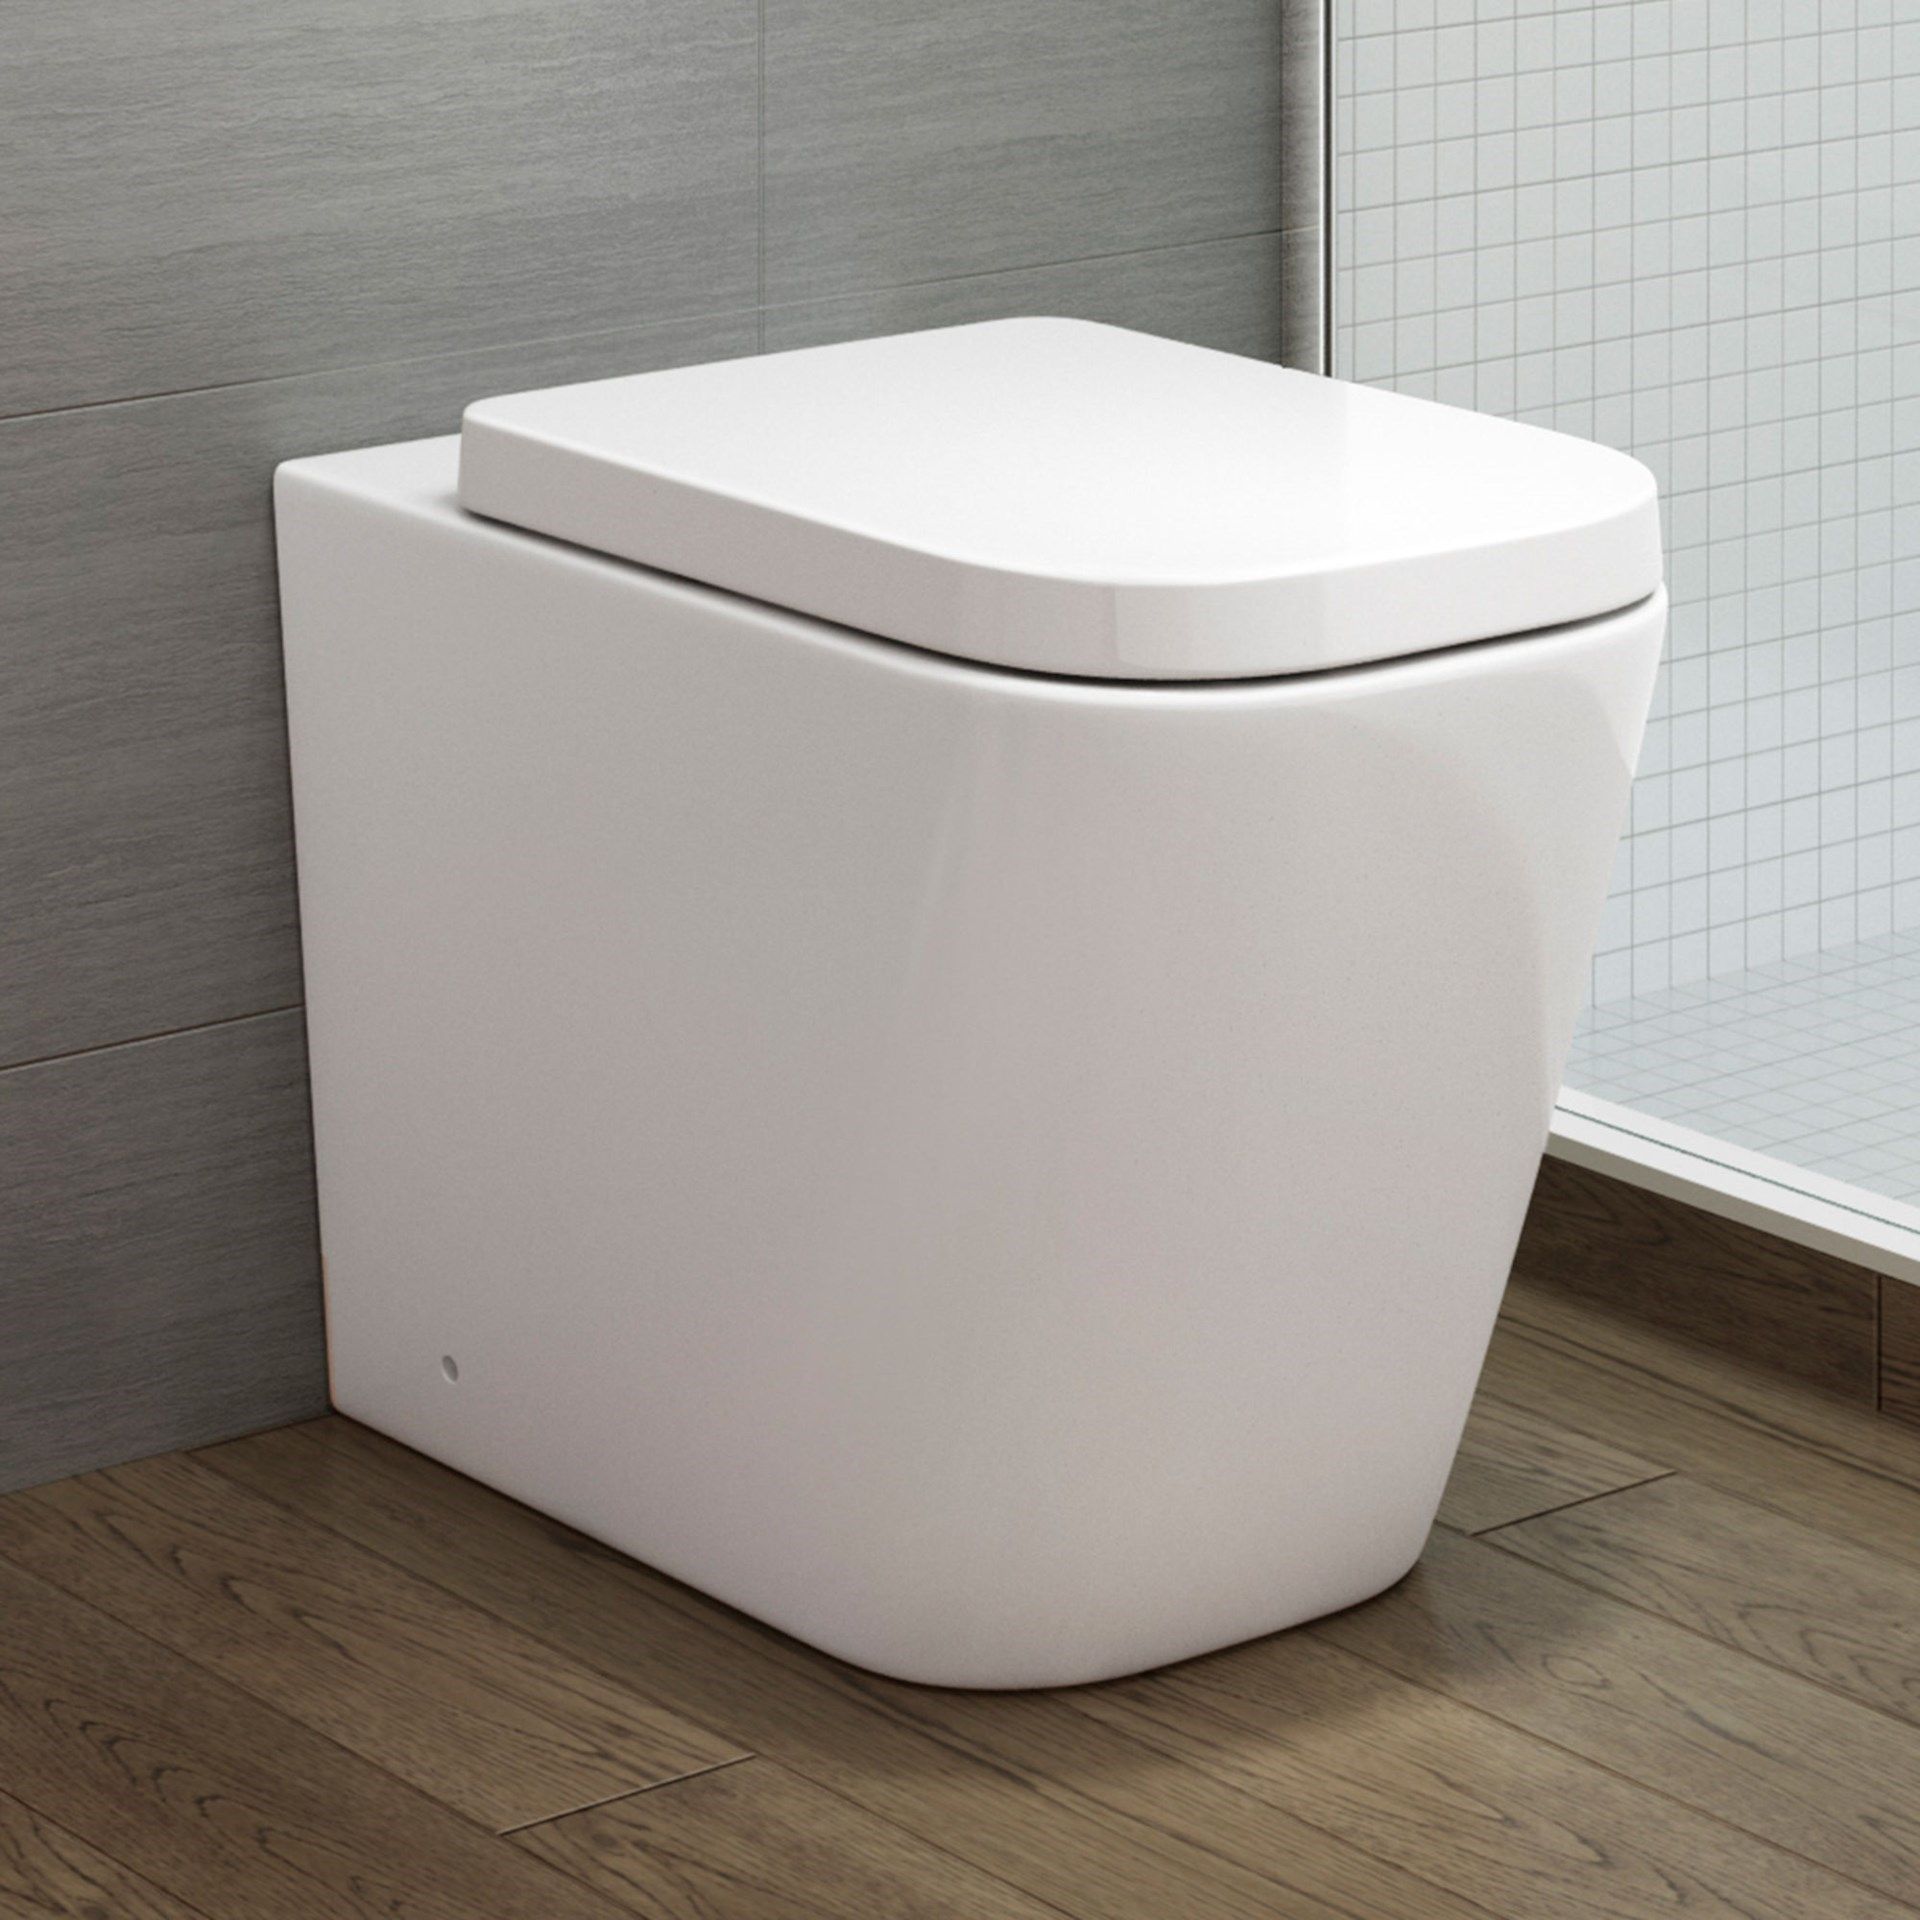 BRAND NEW BOXED Florence Rimless Back to Wall Toilet inc Luxury Soft Close Seat.RRP £349.99 each.